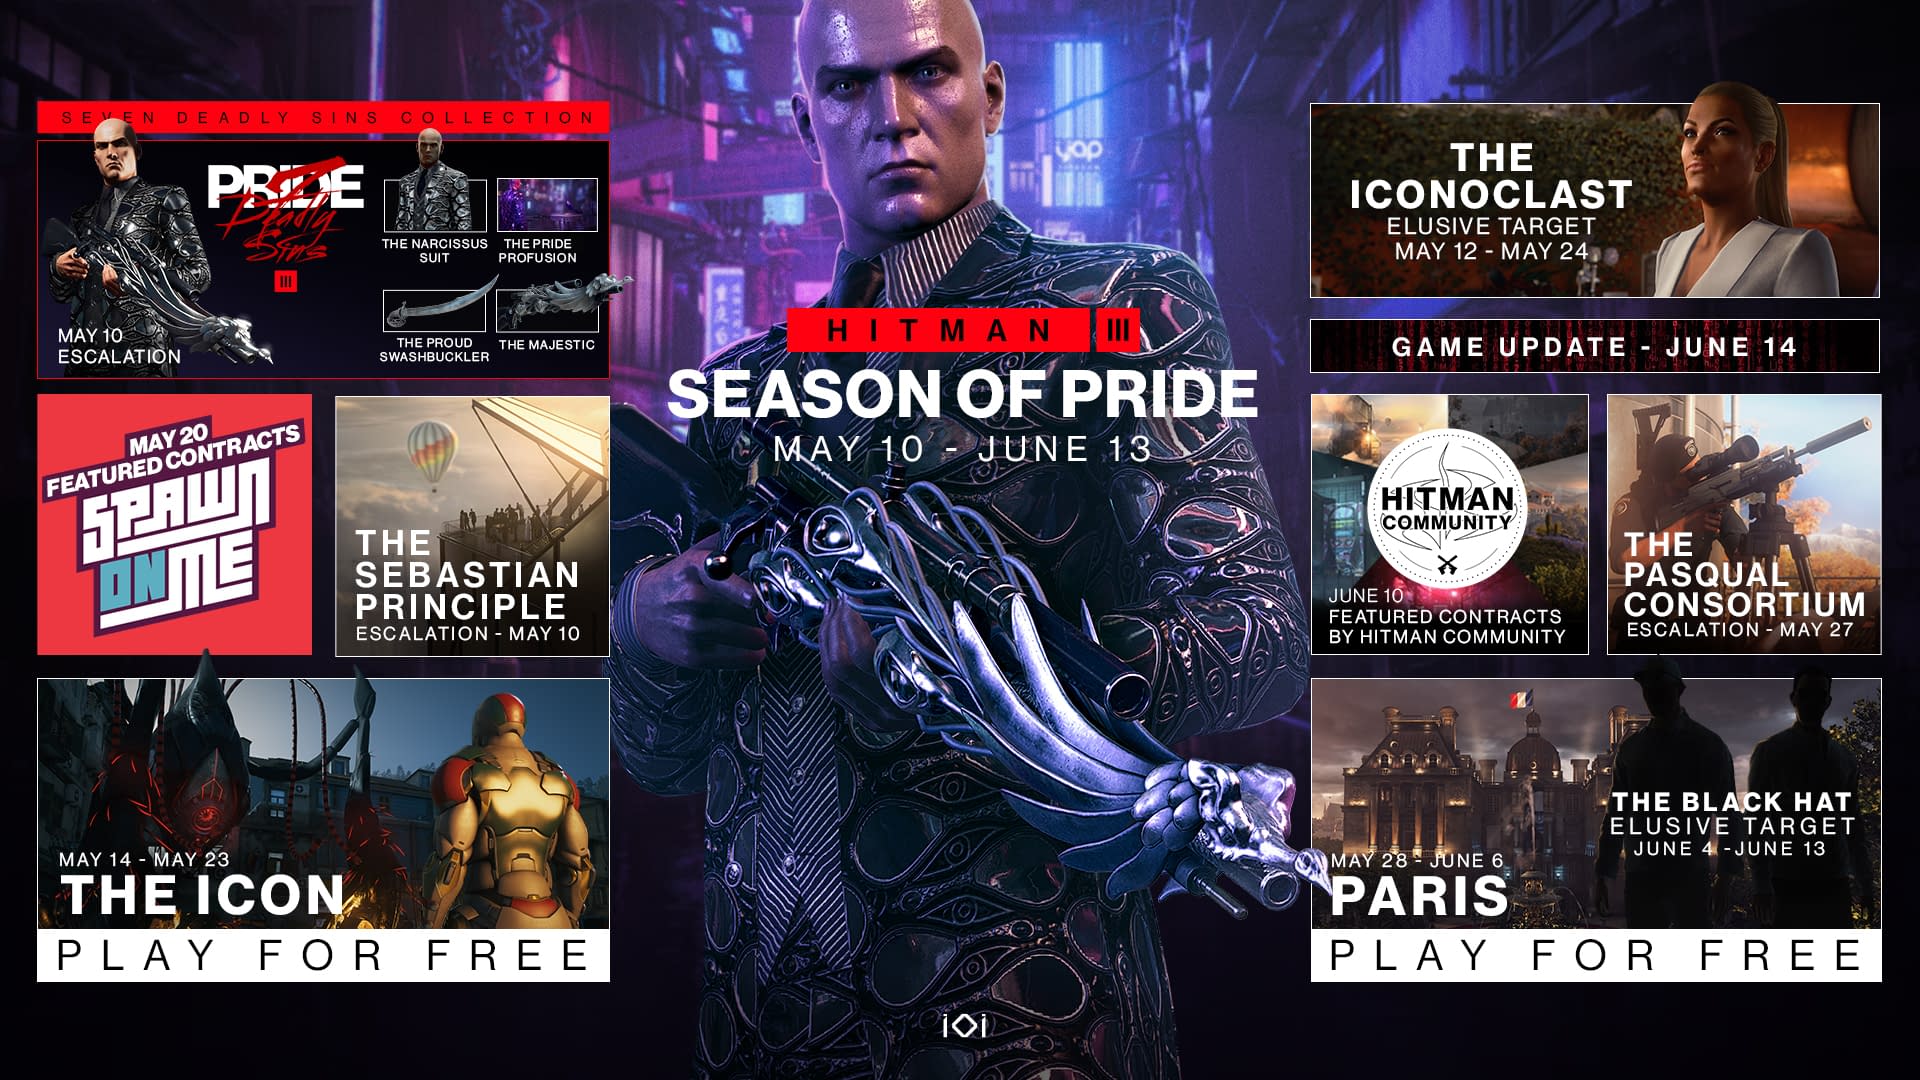 Free games: Hitman 2 Starter Pack gives you the first level free